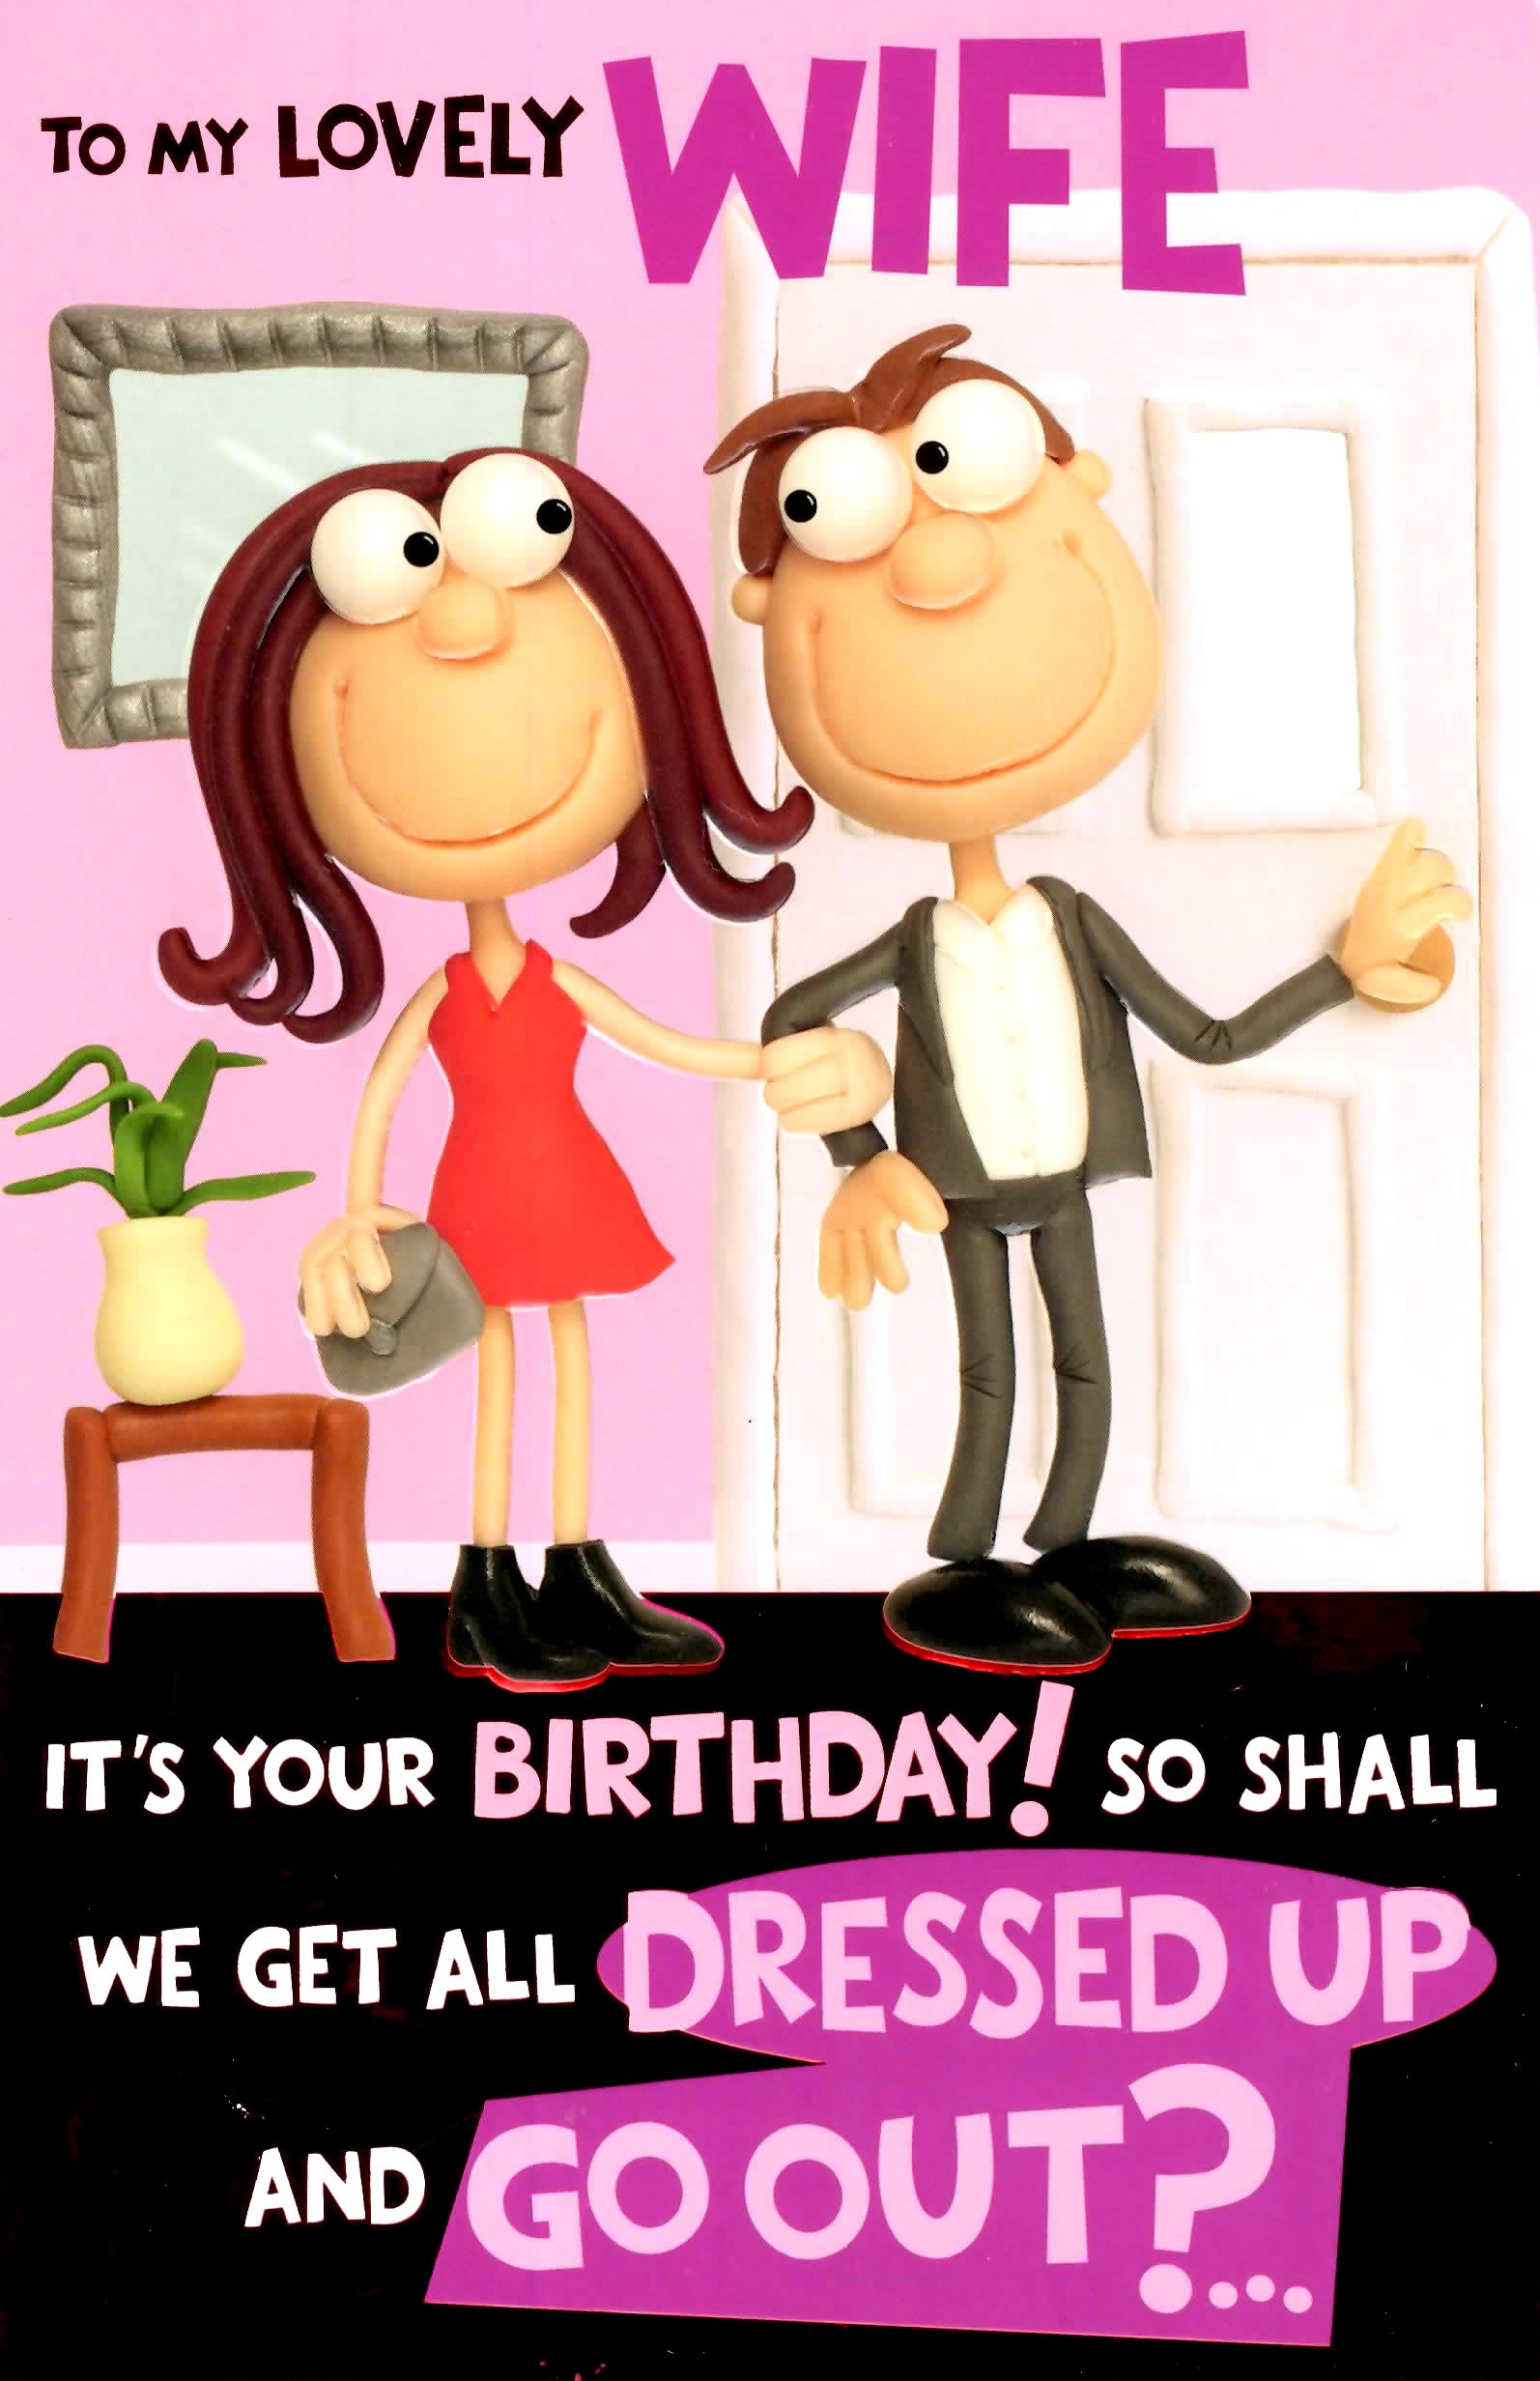 Funny Birthday Wishes For Wife
 Cute Funny Rude Lovely Wife Birthday Greeting Card